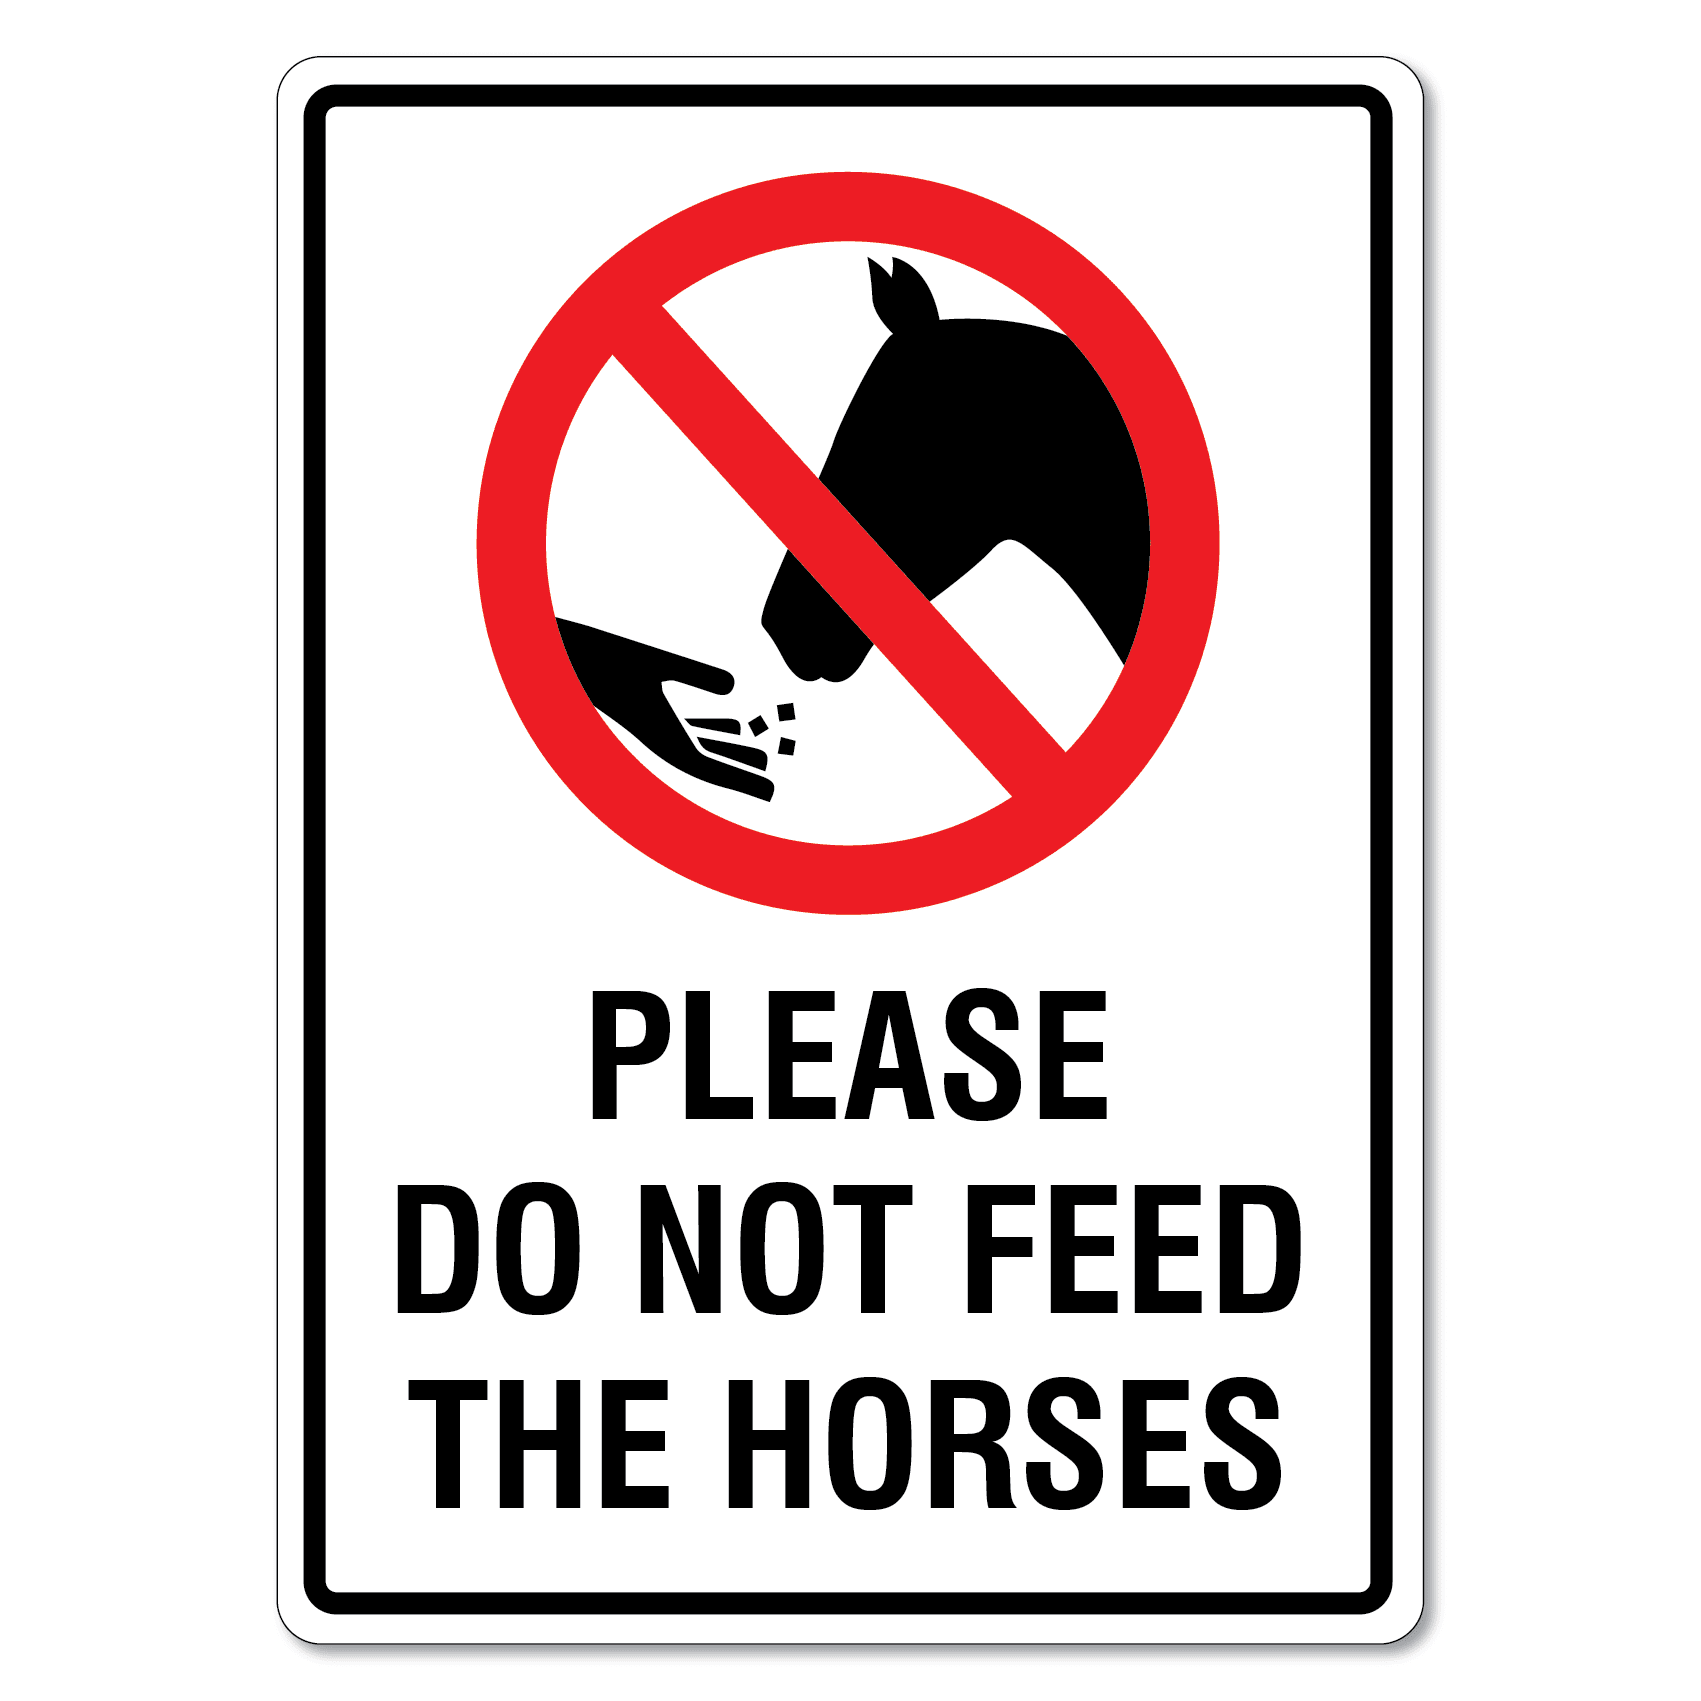 Please do not disclose. Please do not Feed the animals. Please do not Feed the animals знак. Do not Feed the animals sign. Please do not.